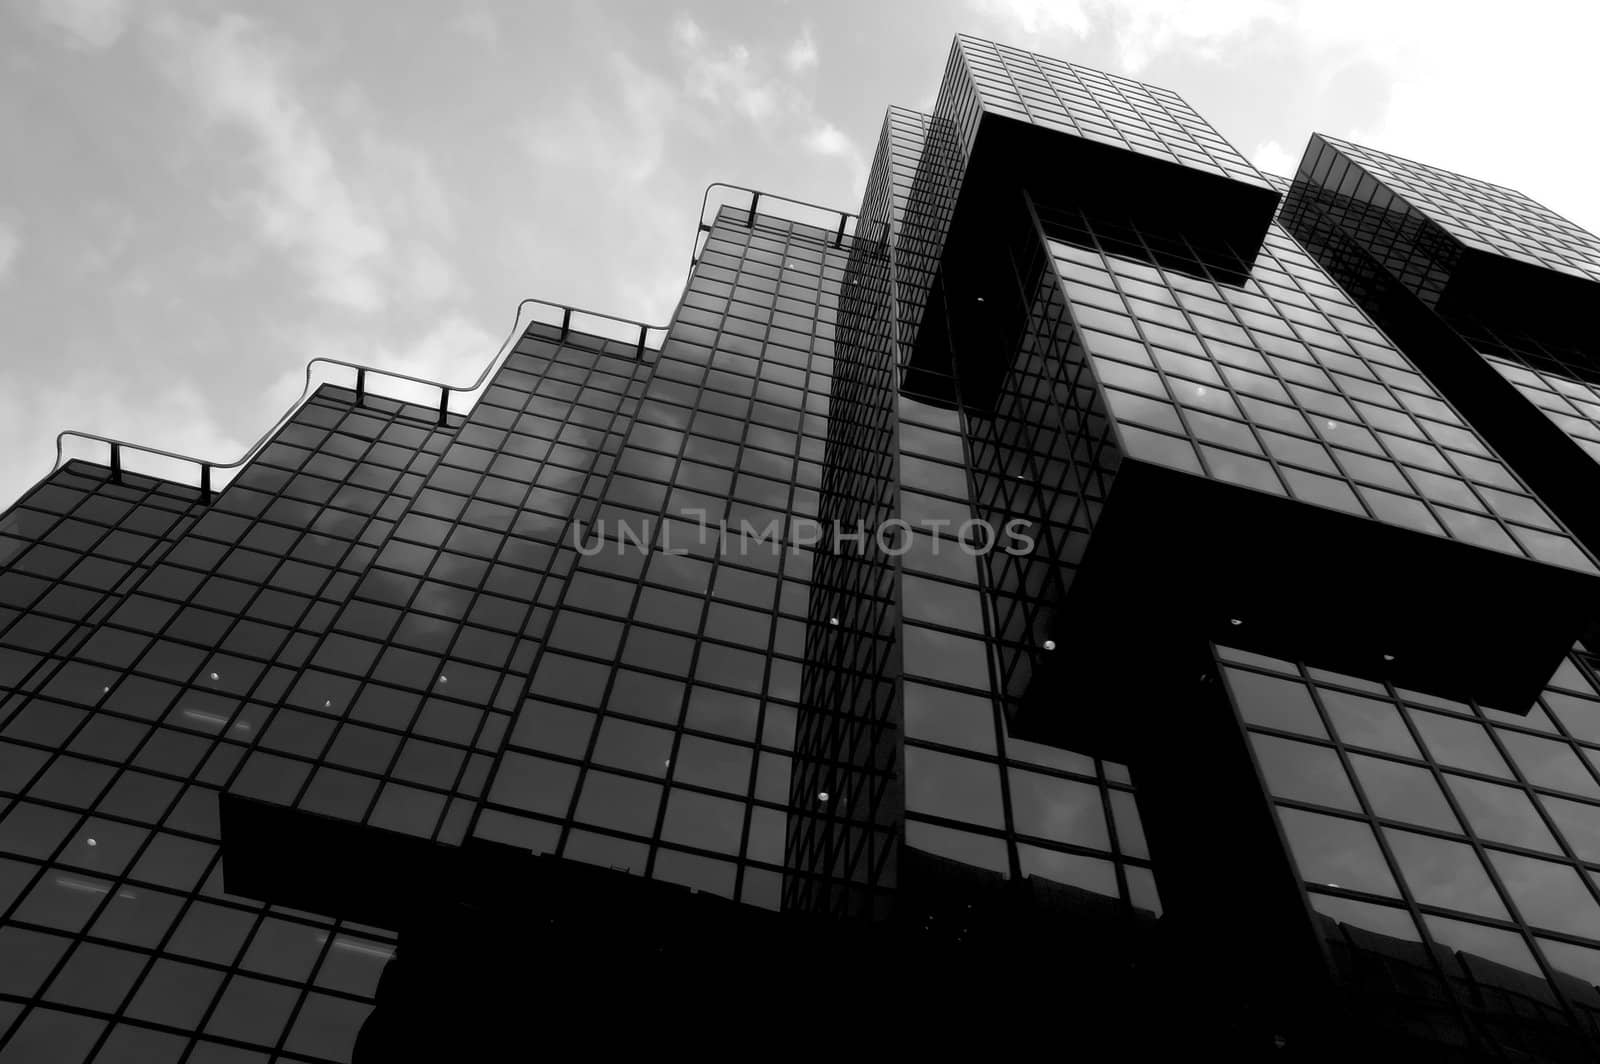 Modern London Architecture by eugenef